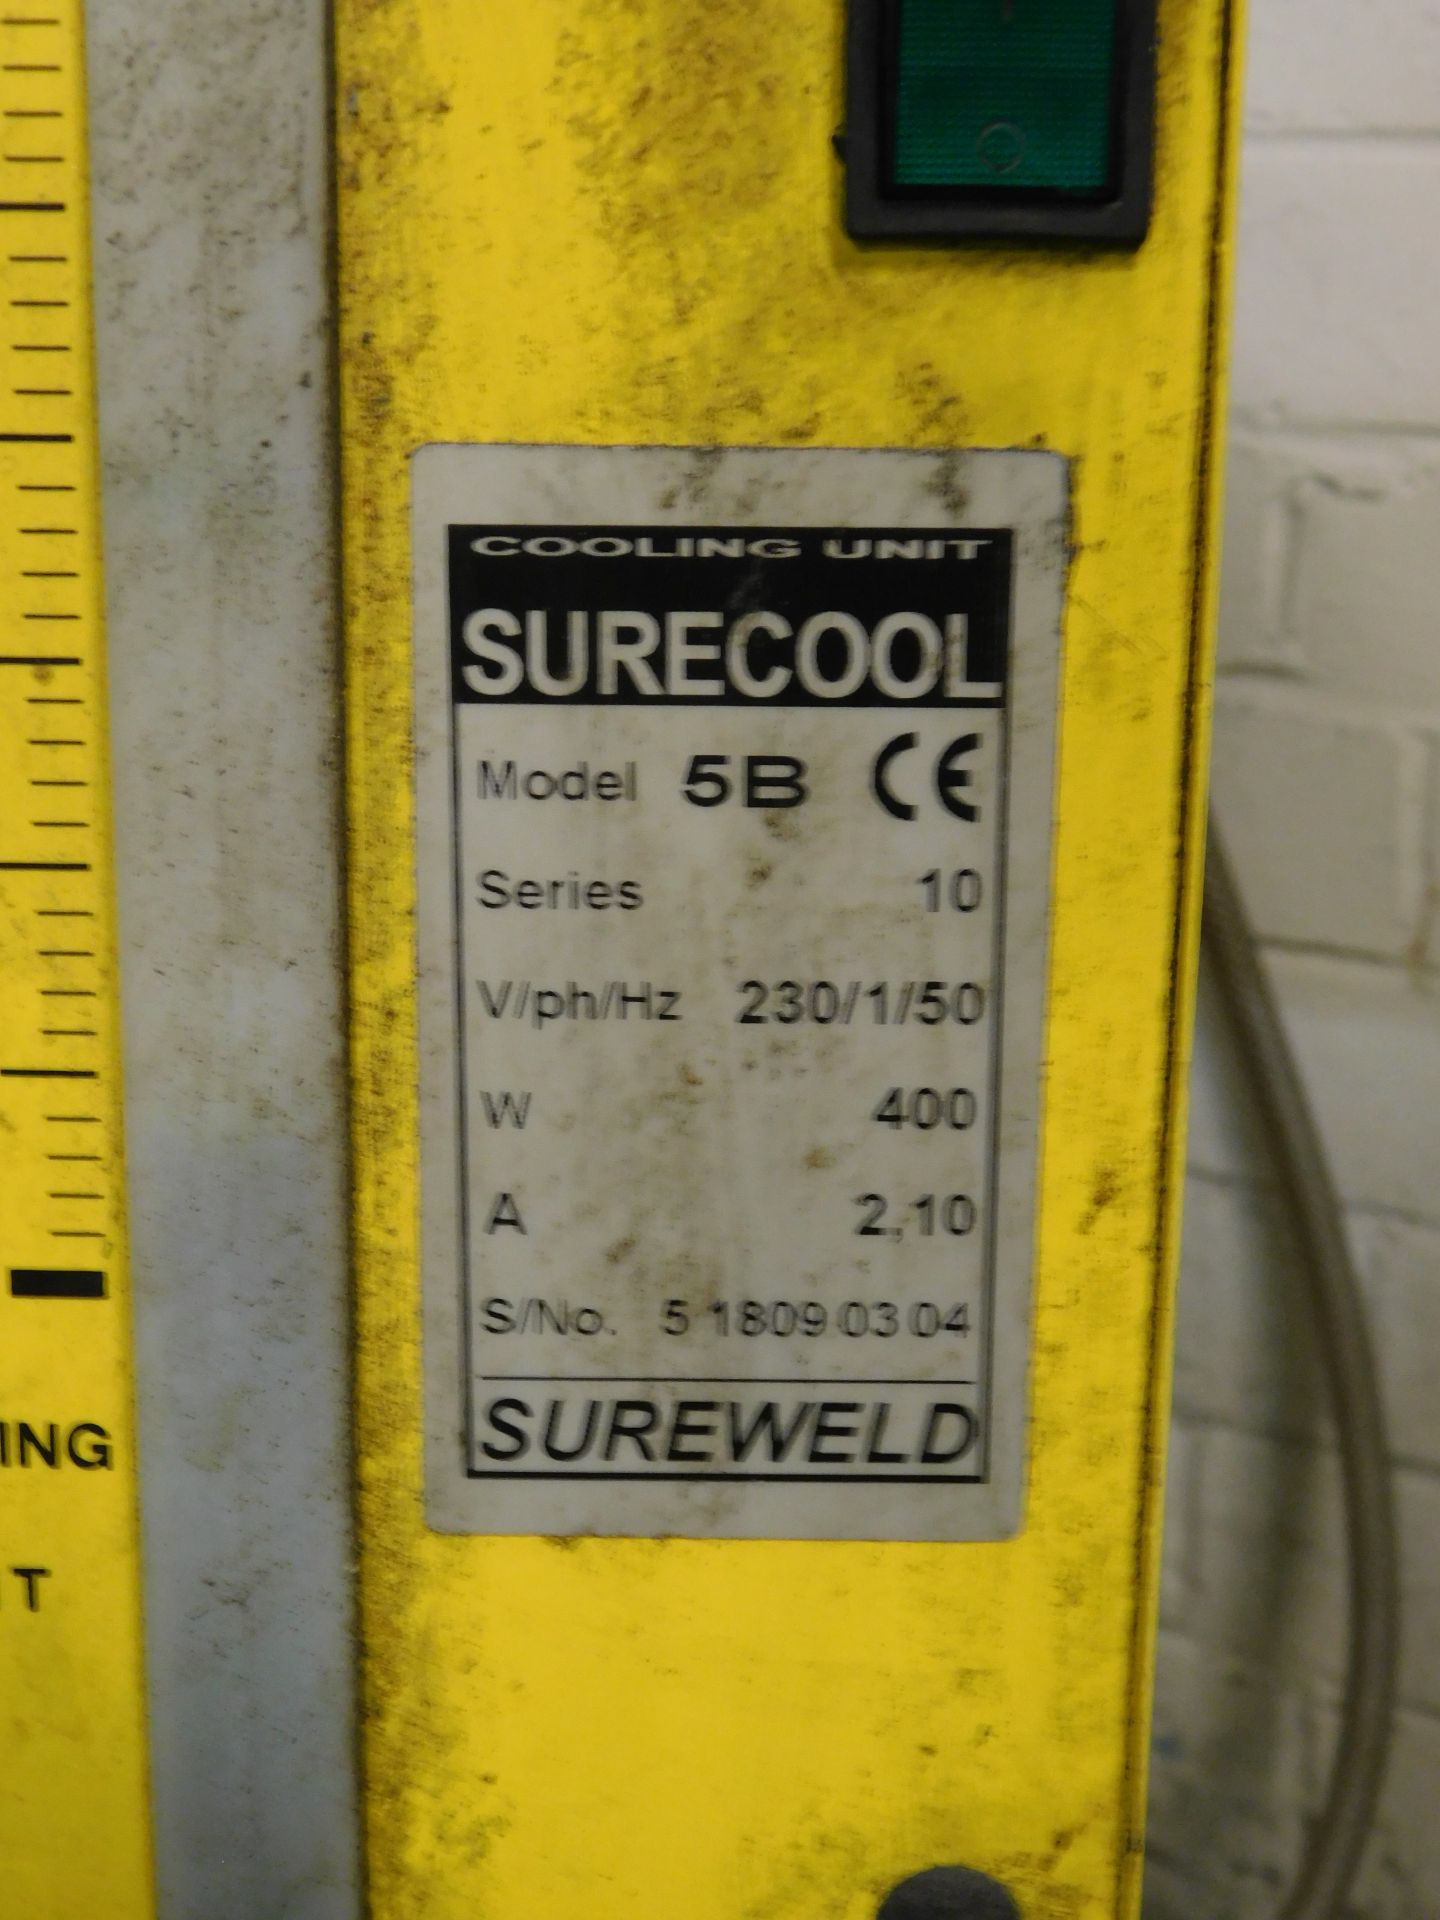 PBF 26 Spot Welder with Sureweld Surecool Model 5B Cooling Unit (Location: Kettering - See General - Image 2 of 4